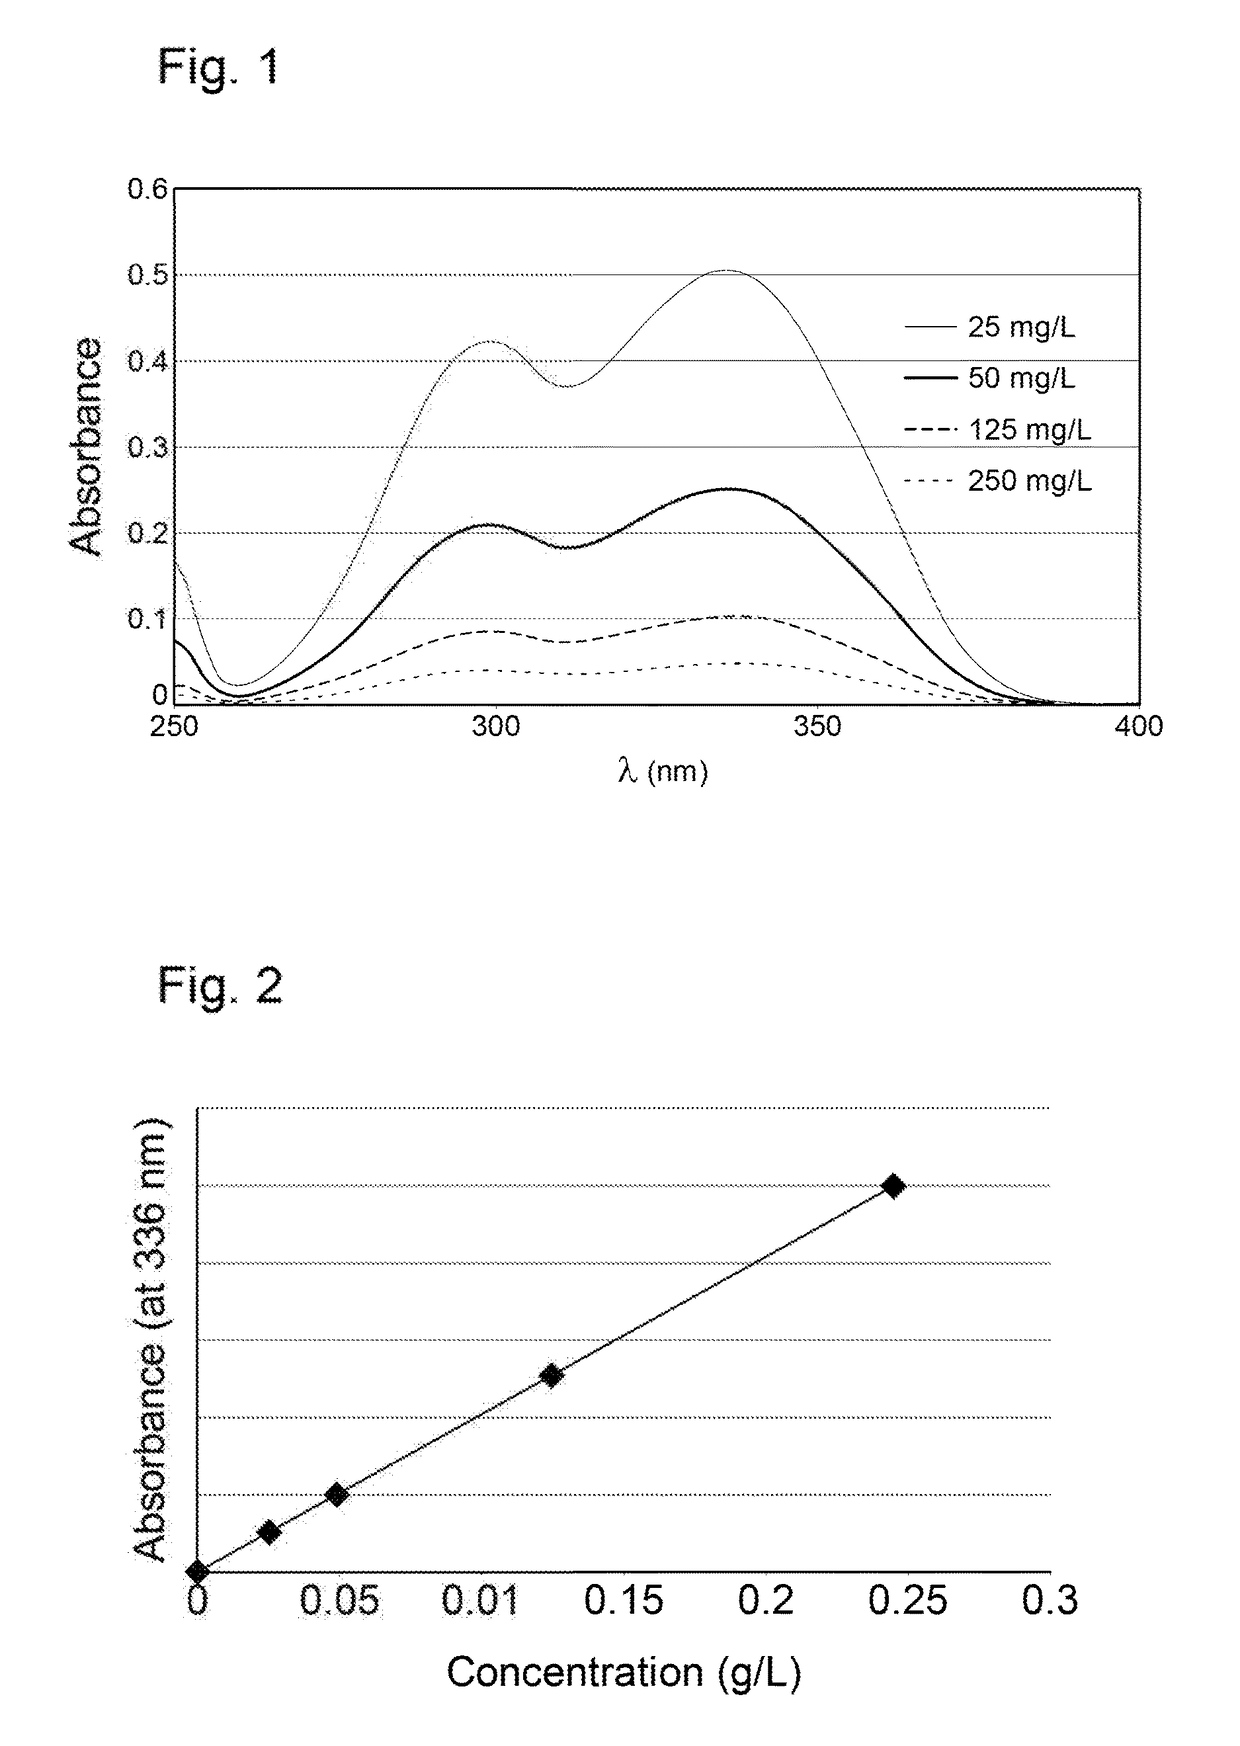 Substrate including a surface coated with an epilame agent and method for coating such a substrate with epilame